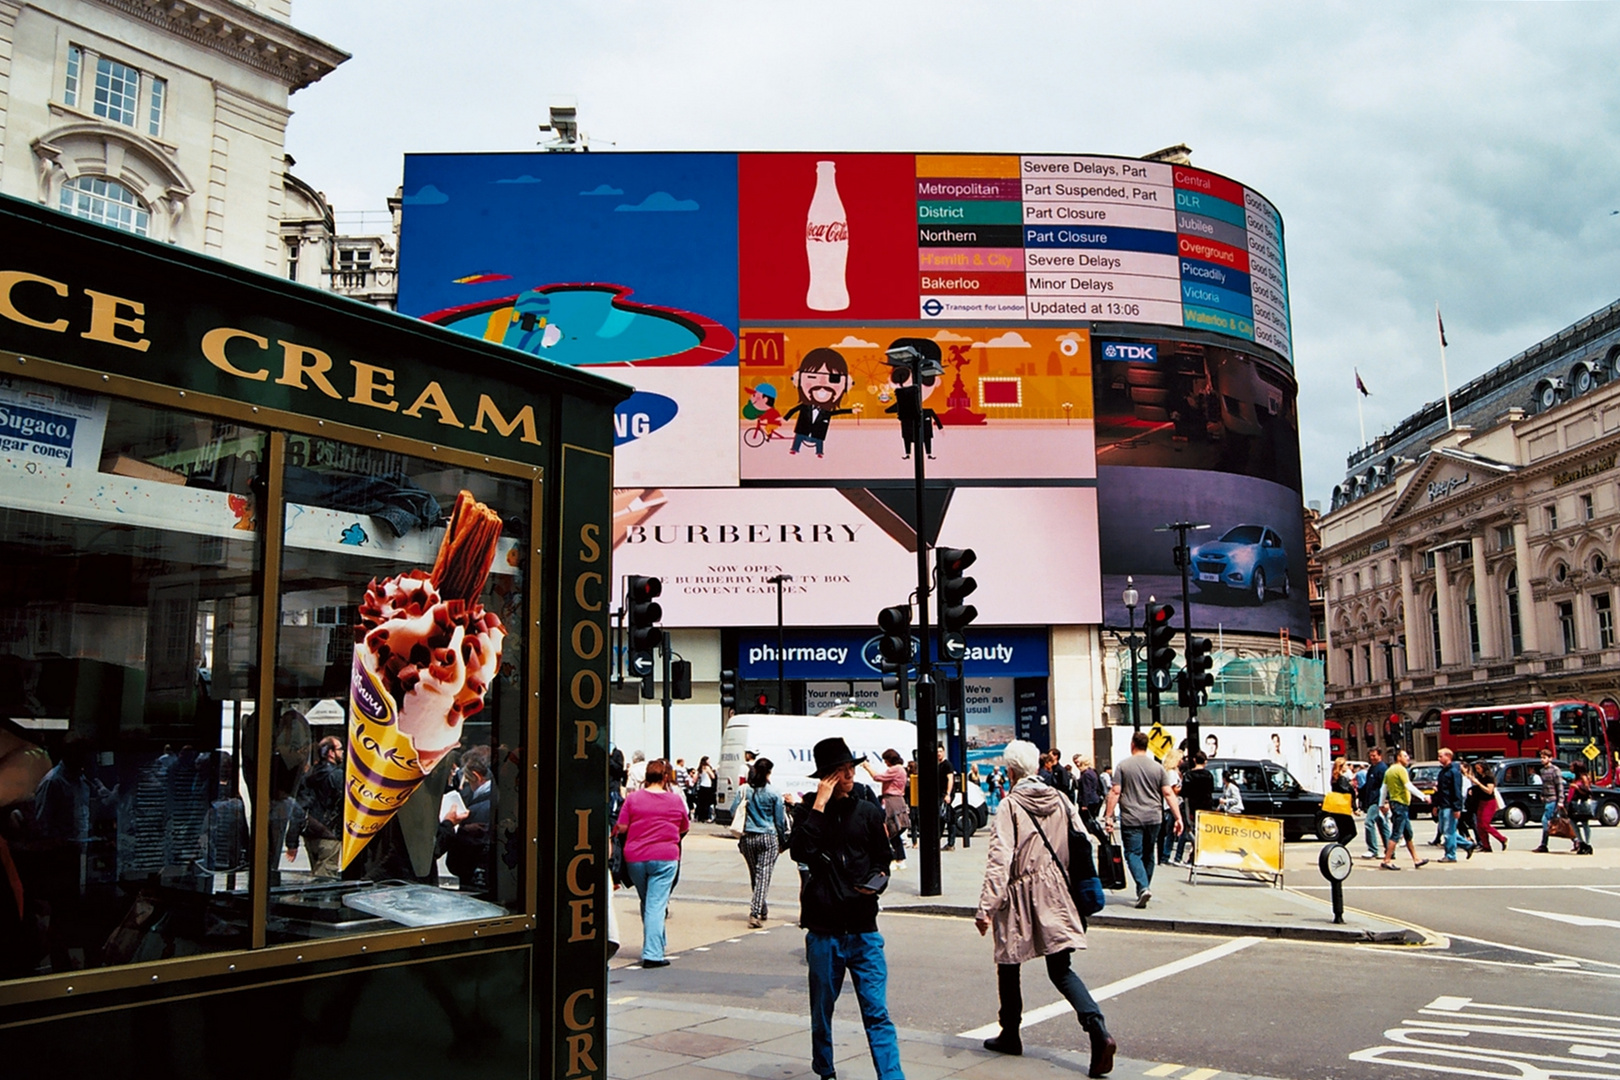 [Picadilly Circus]